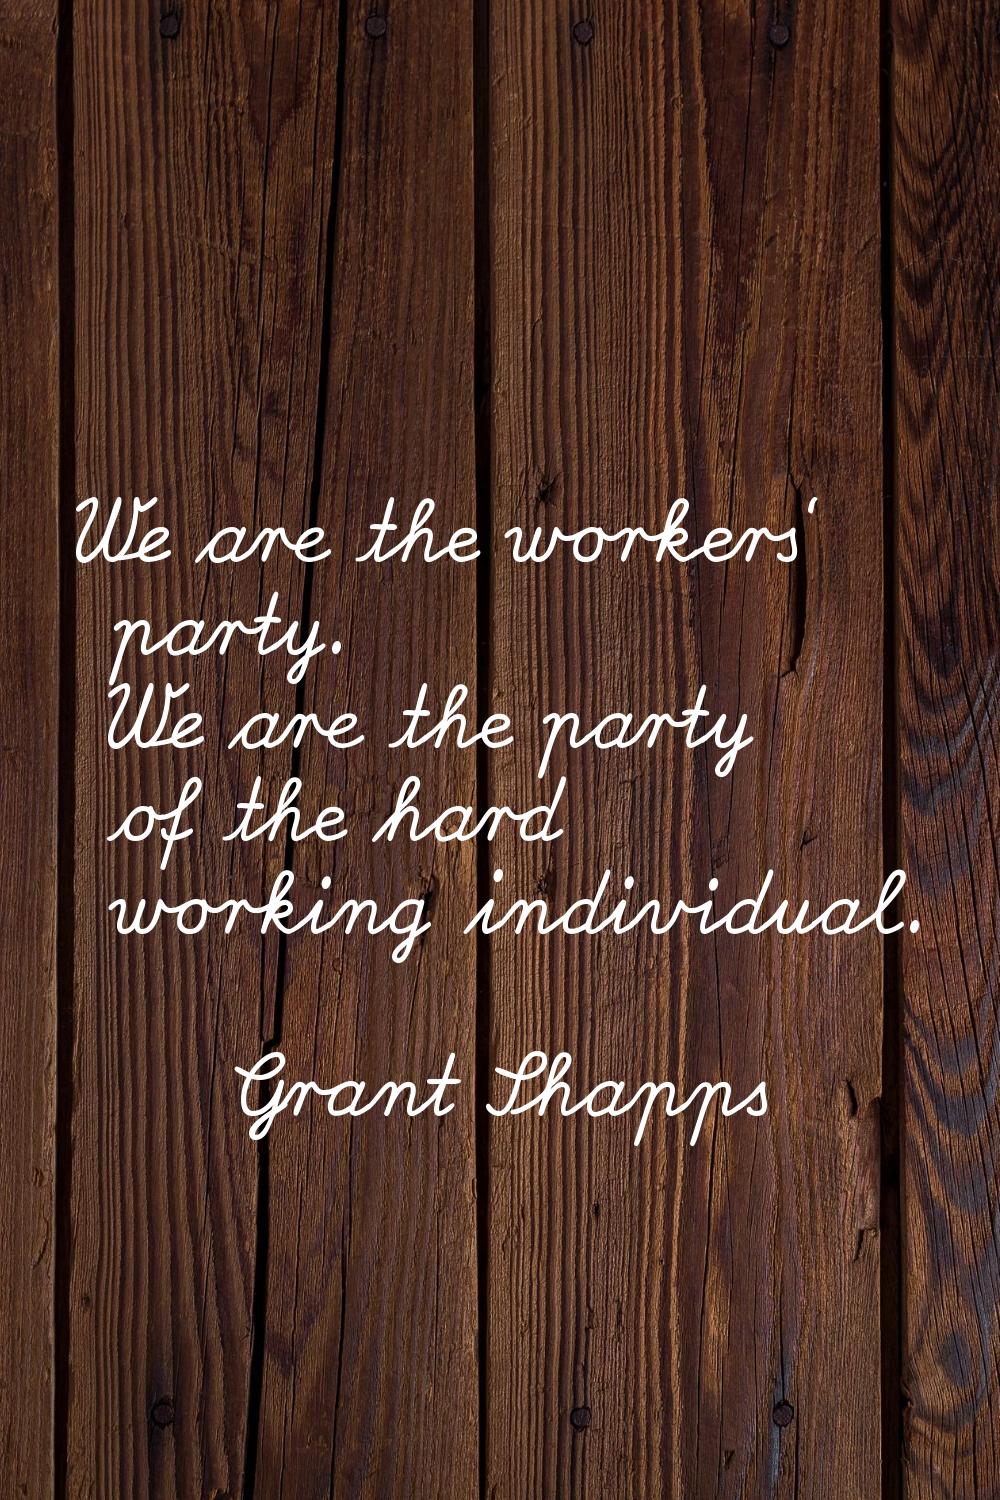 We are the workers' party. We are the party of the hard working individual.